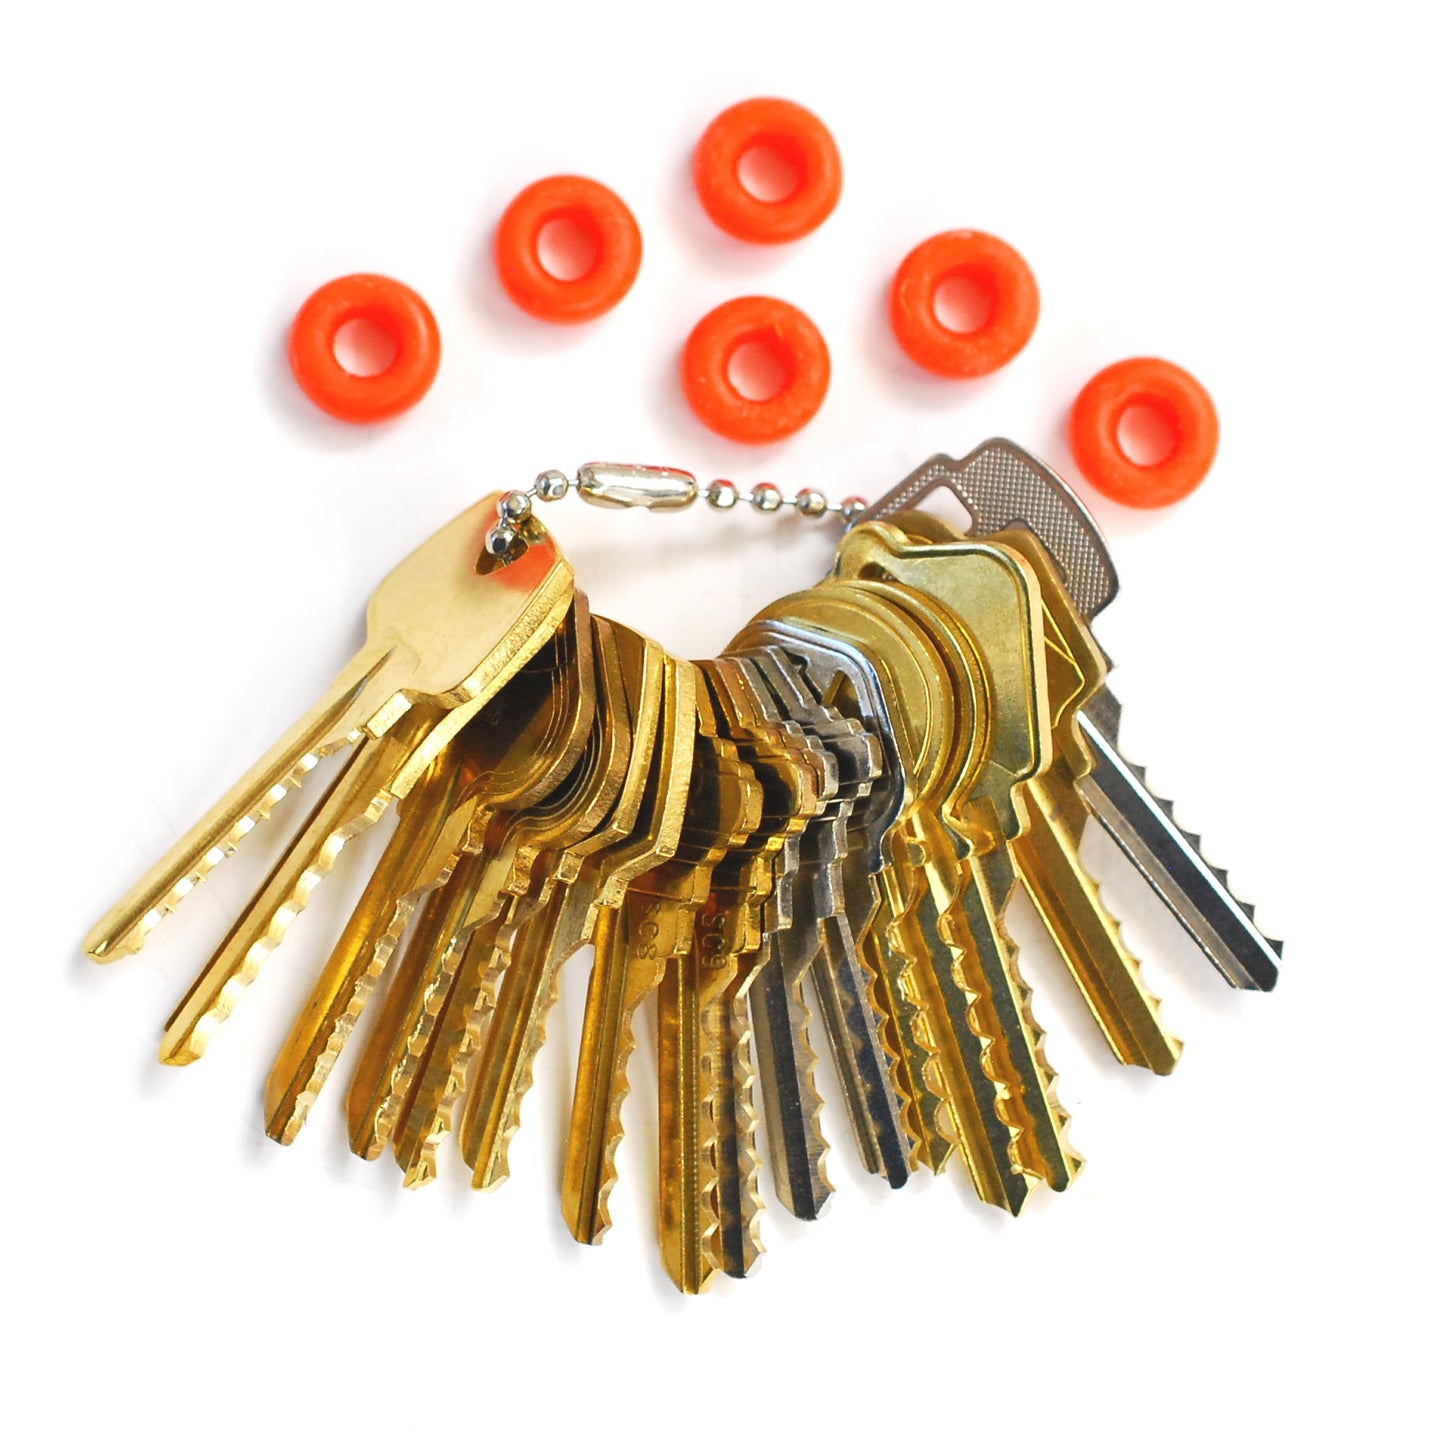 64 Residential, Padlock, Commercial, Mailbox, Cabinet, RV Key Collection Set